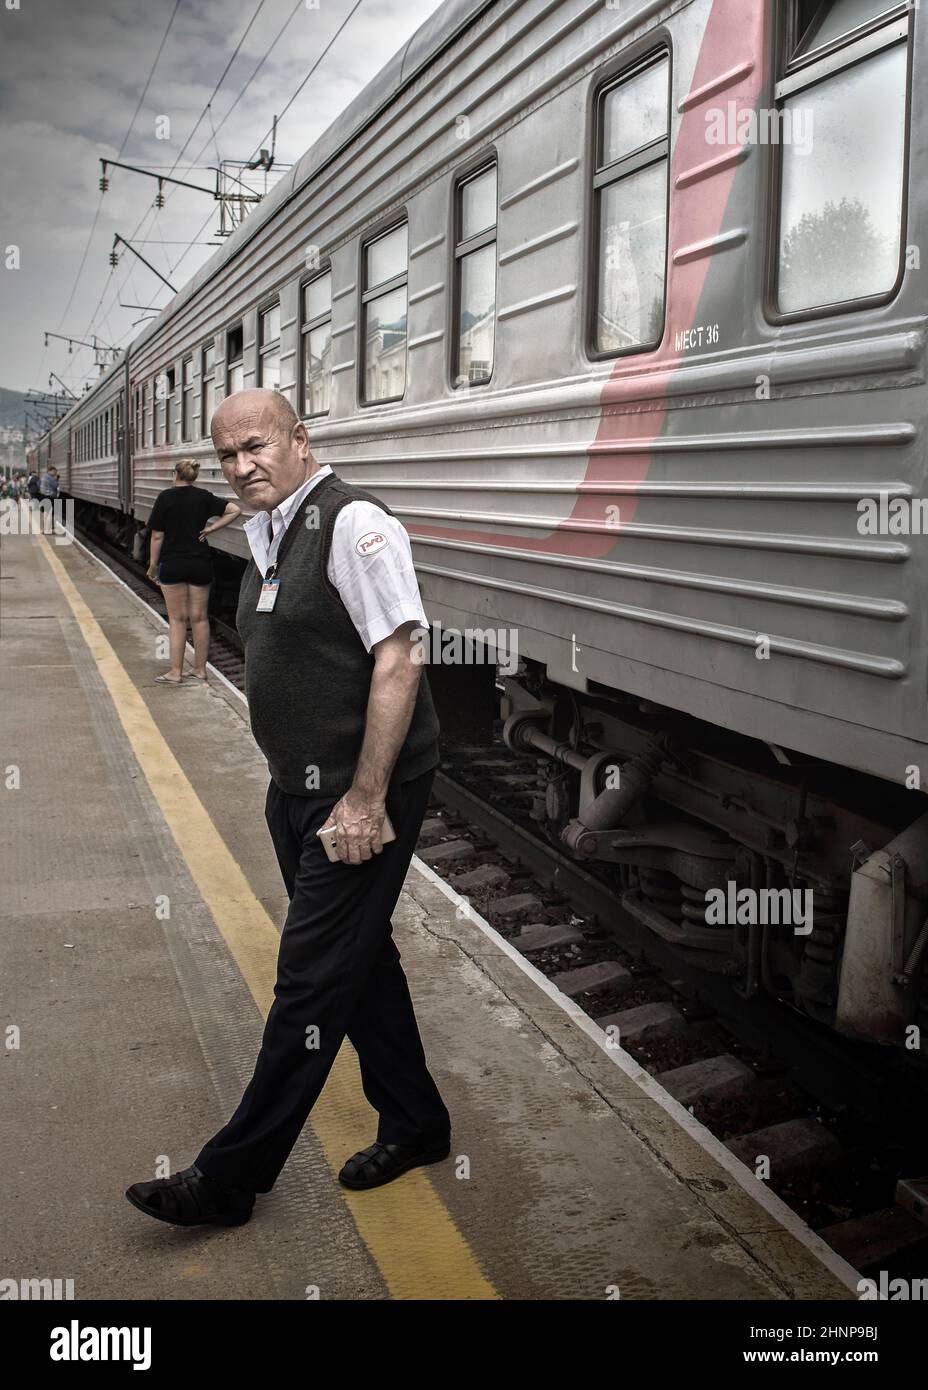 29th of July 2018, Russia, train conductor portrait by the train Stock Photo